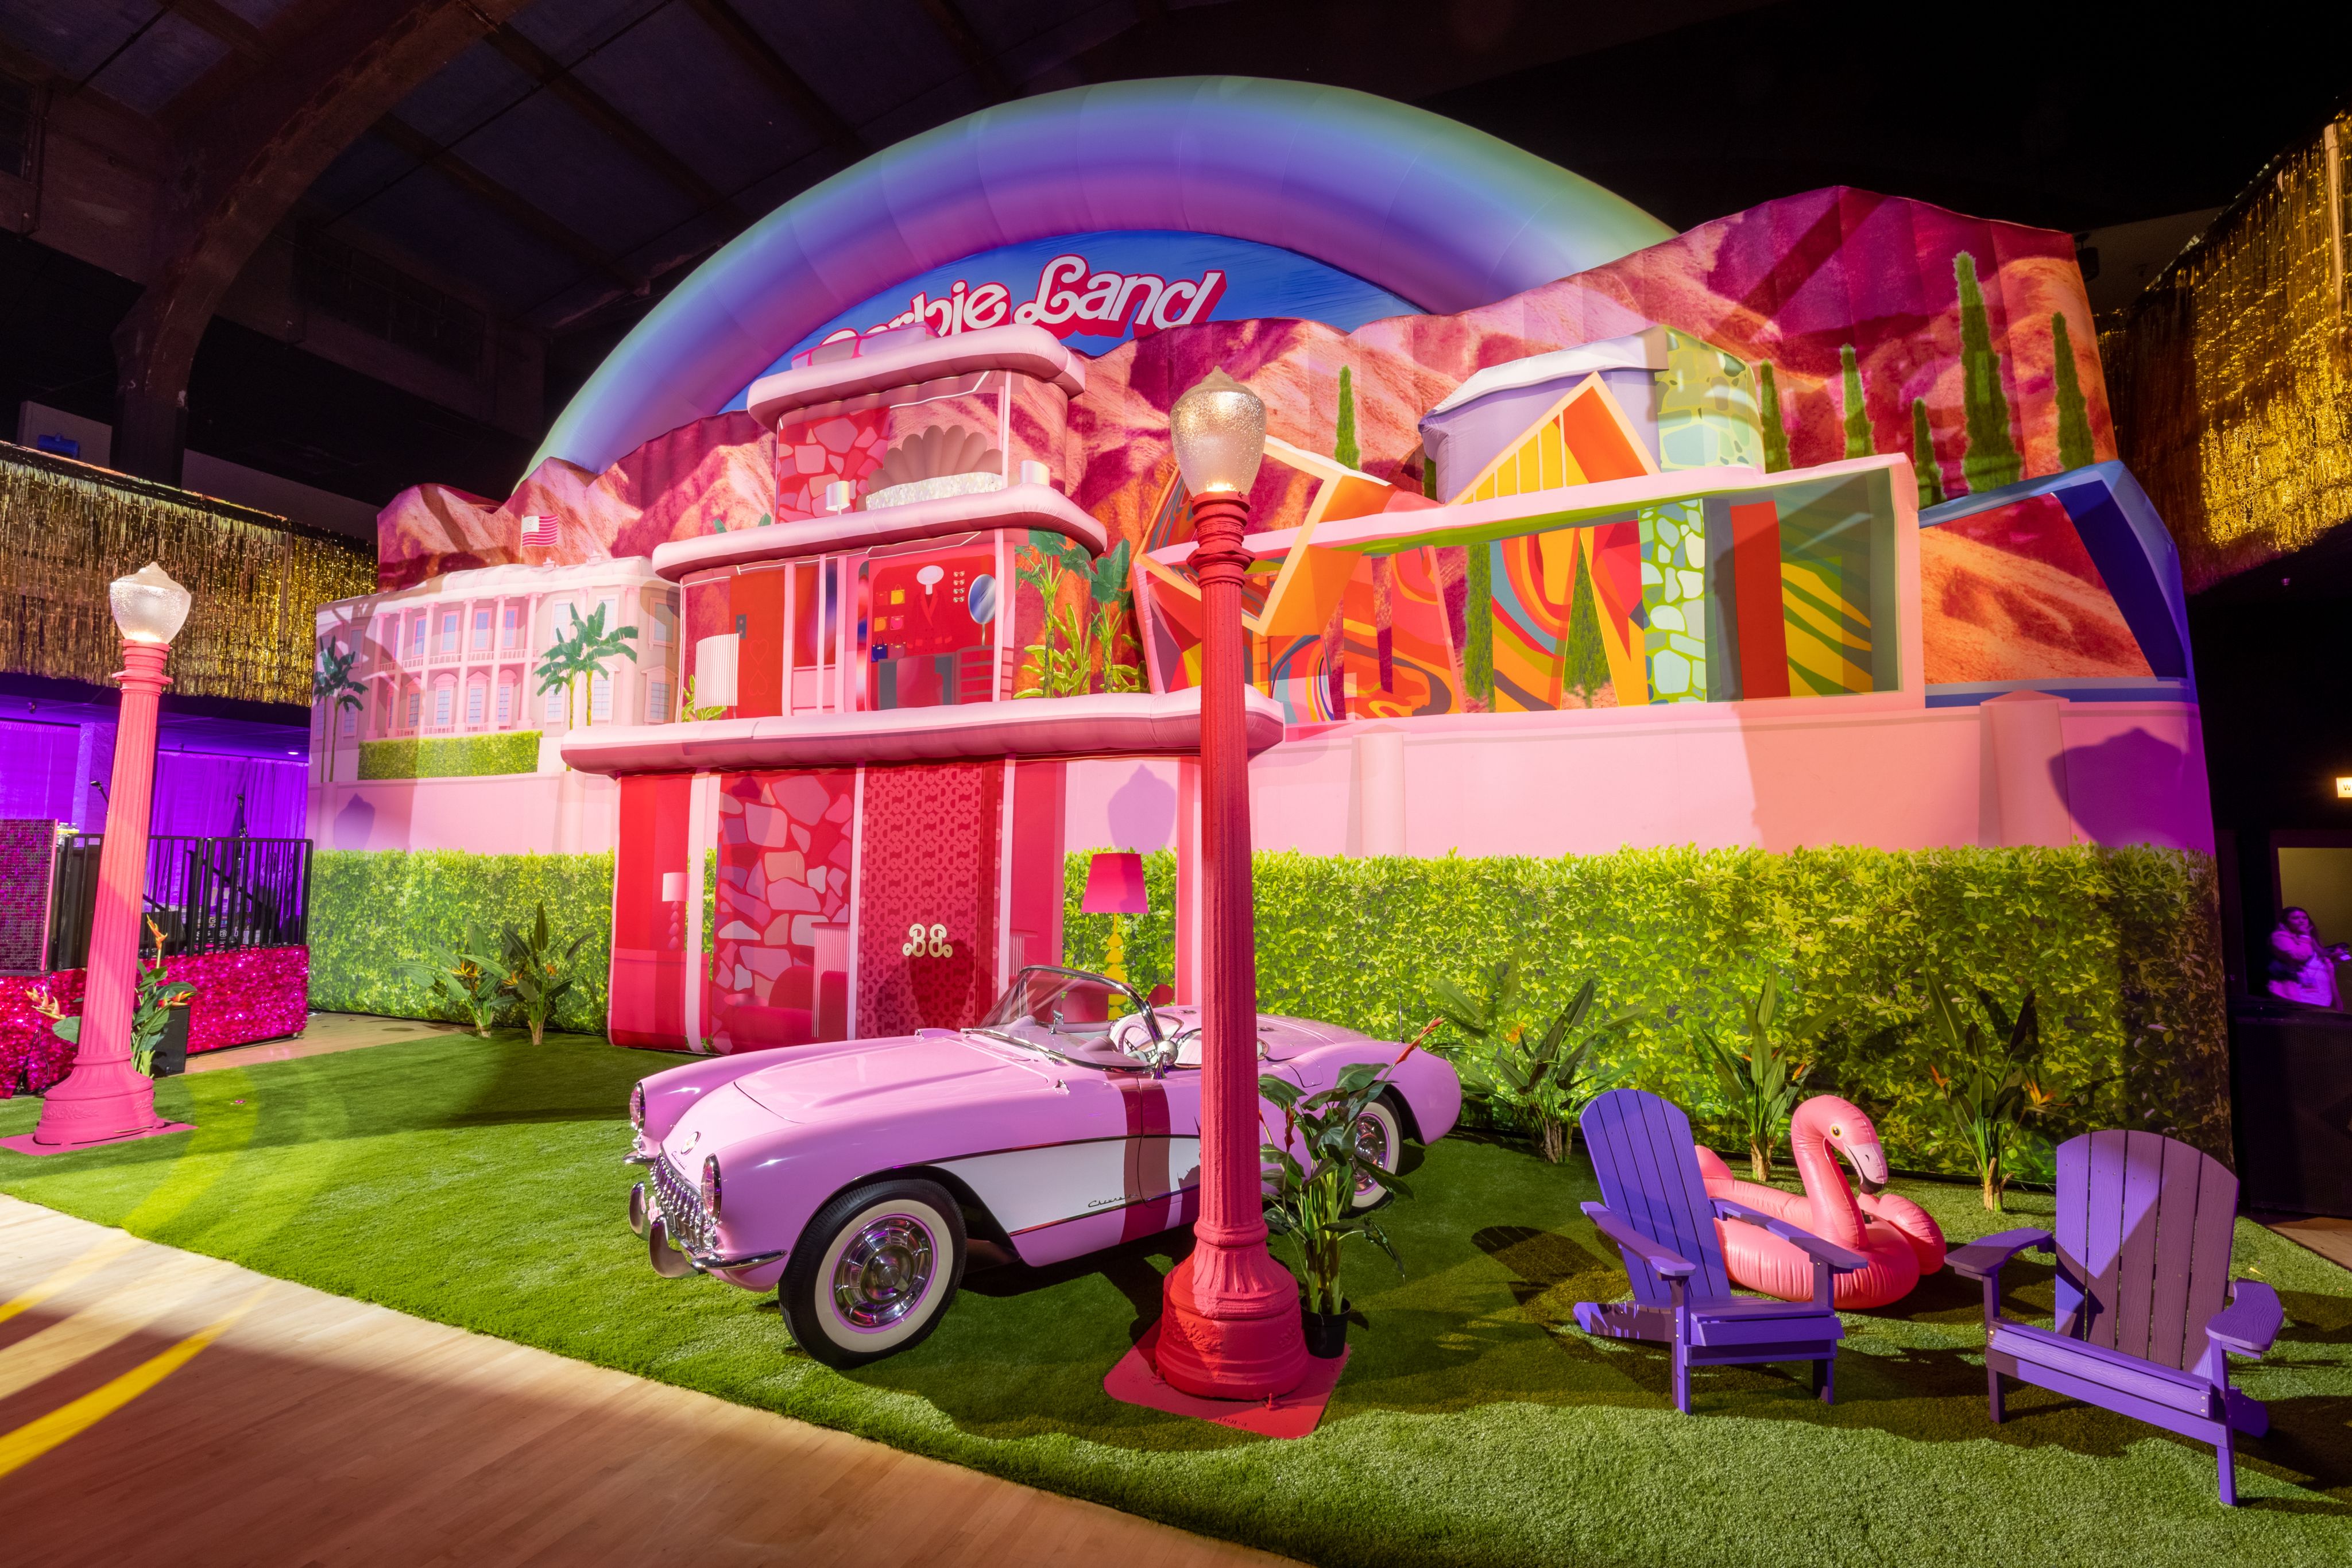 barbie mania, or how warner bros' creative marketing campaign painted the  whole world pink